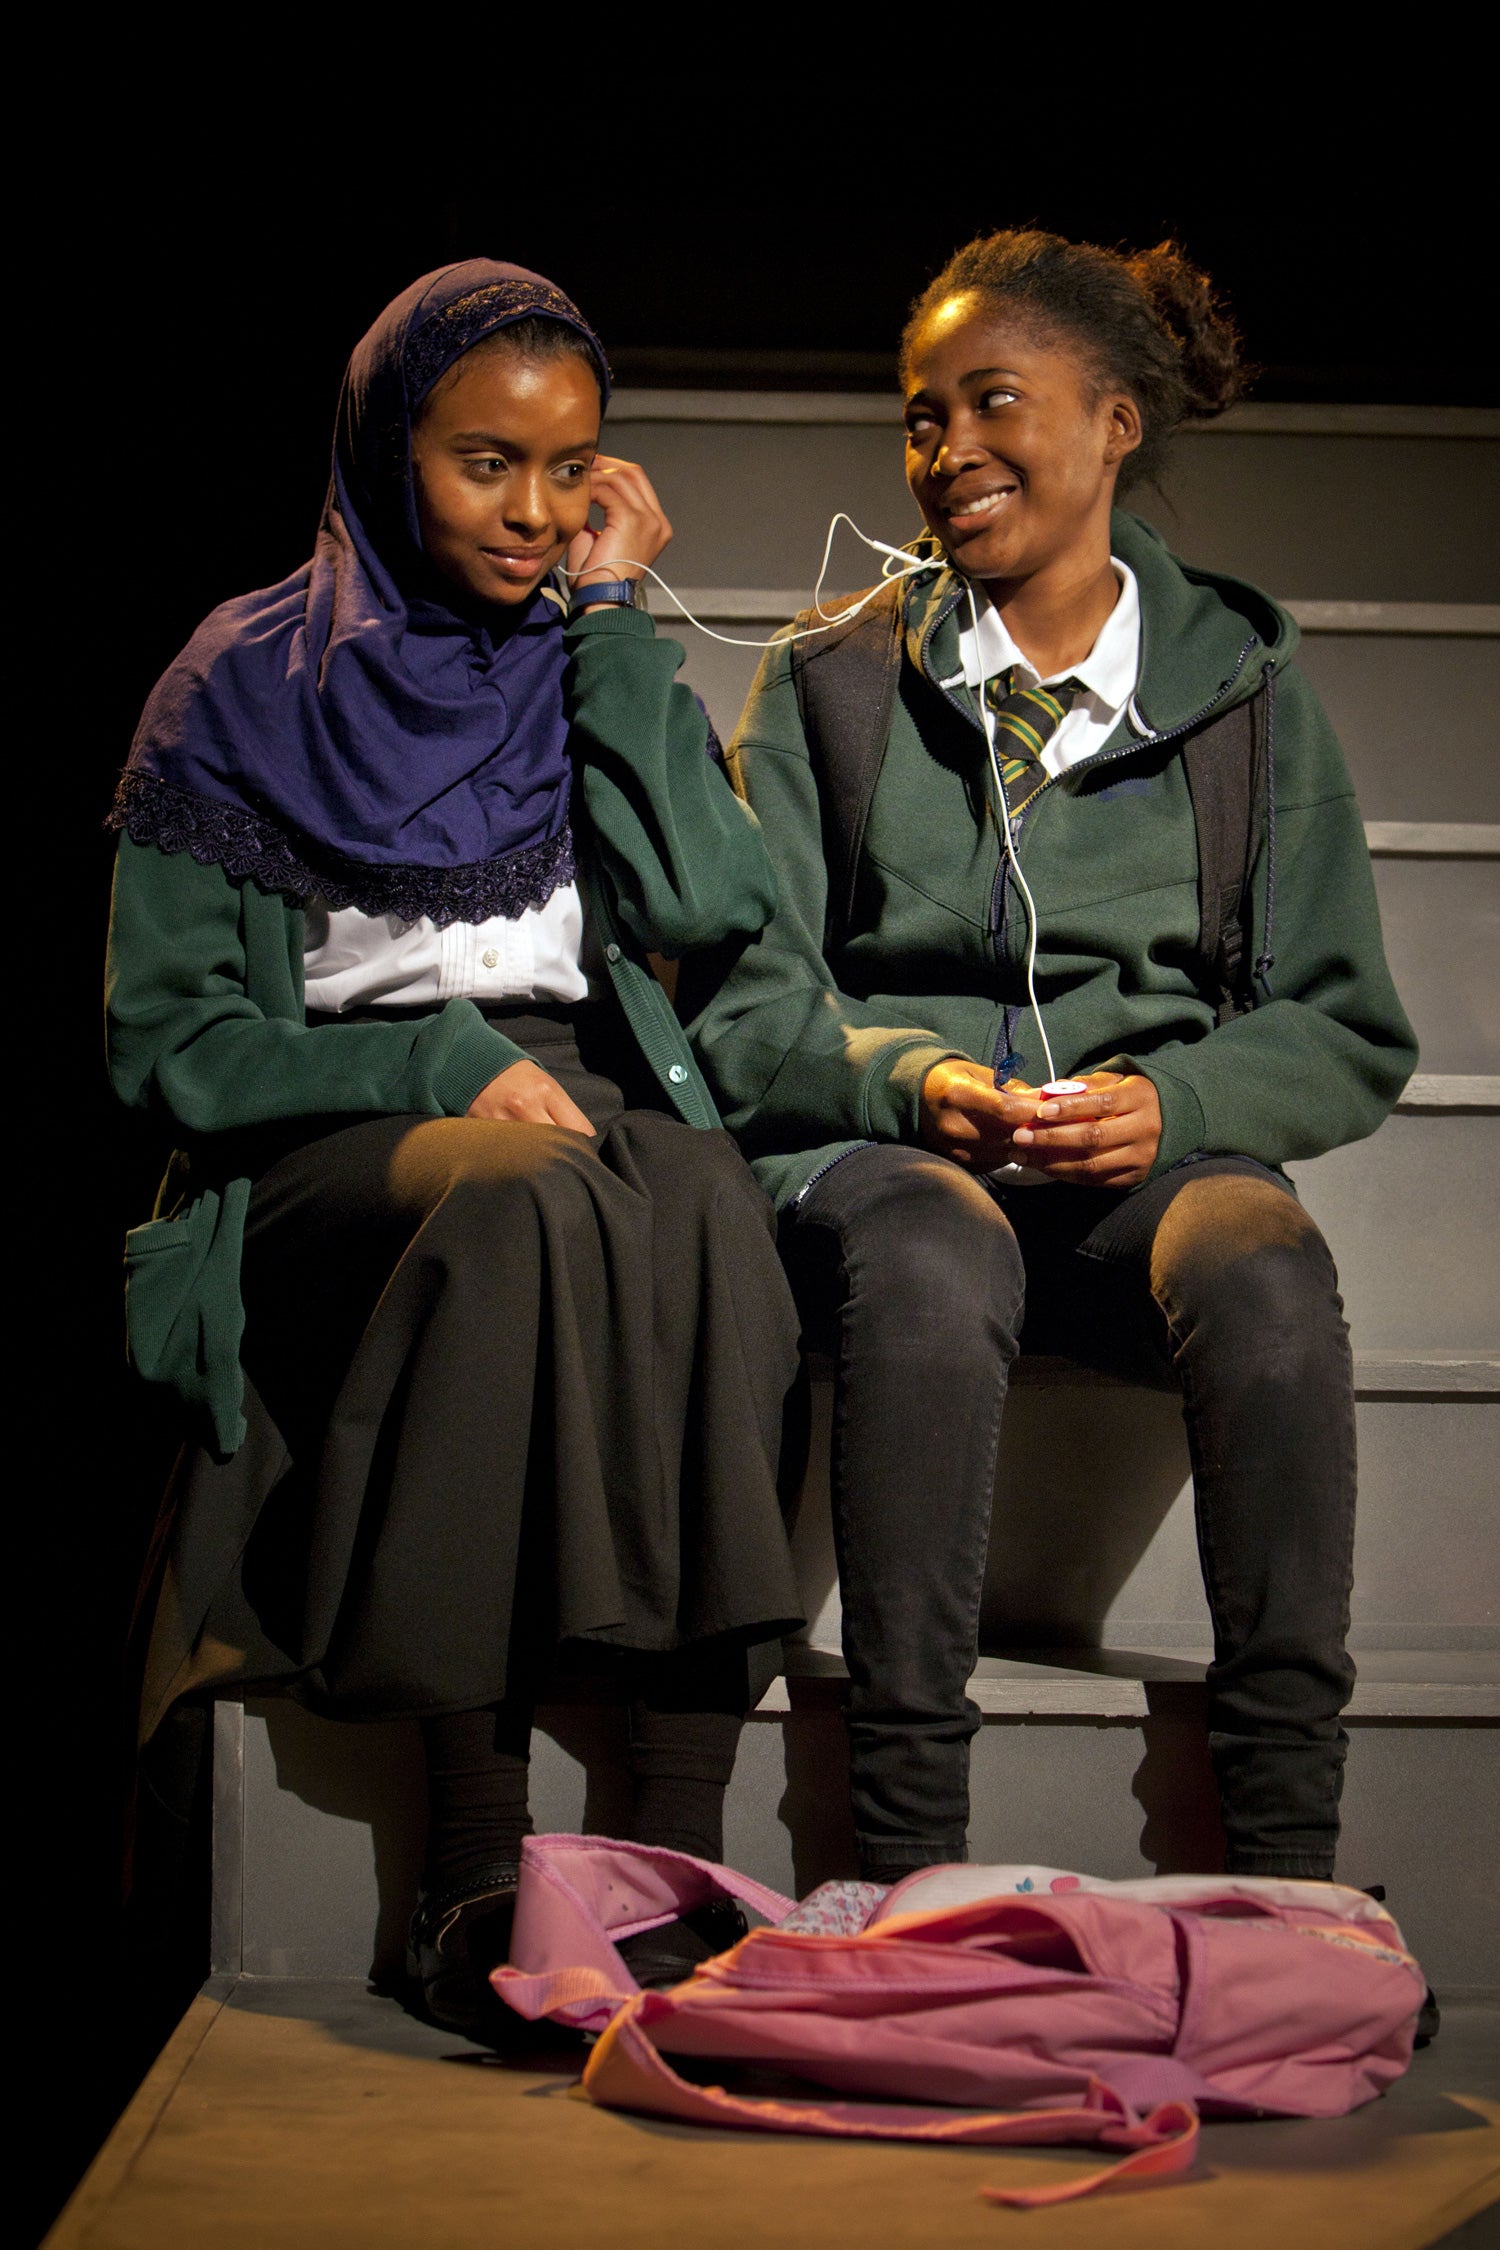 Bonded by wounds: Tsion Habte (Iqra) and Adelayo Adedayo (Muna) in Cuttin' It